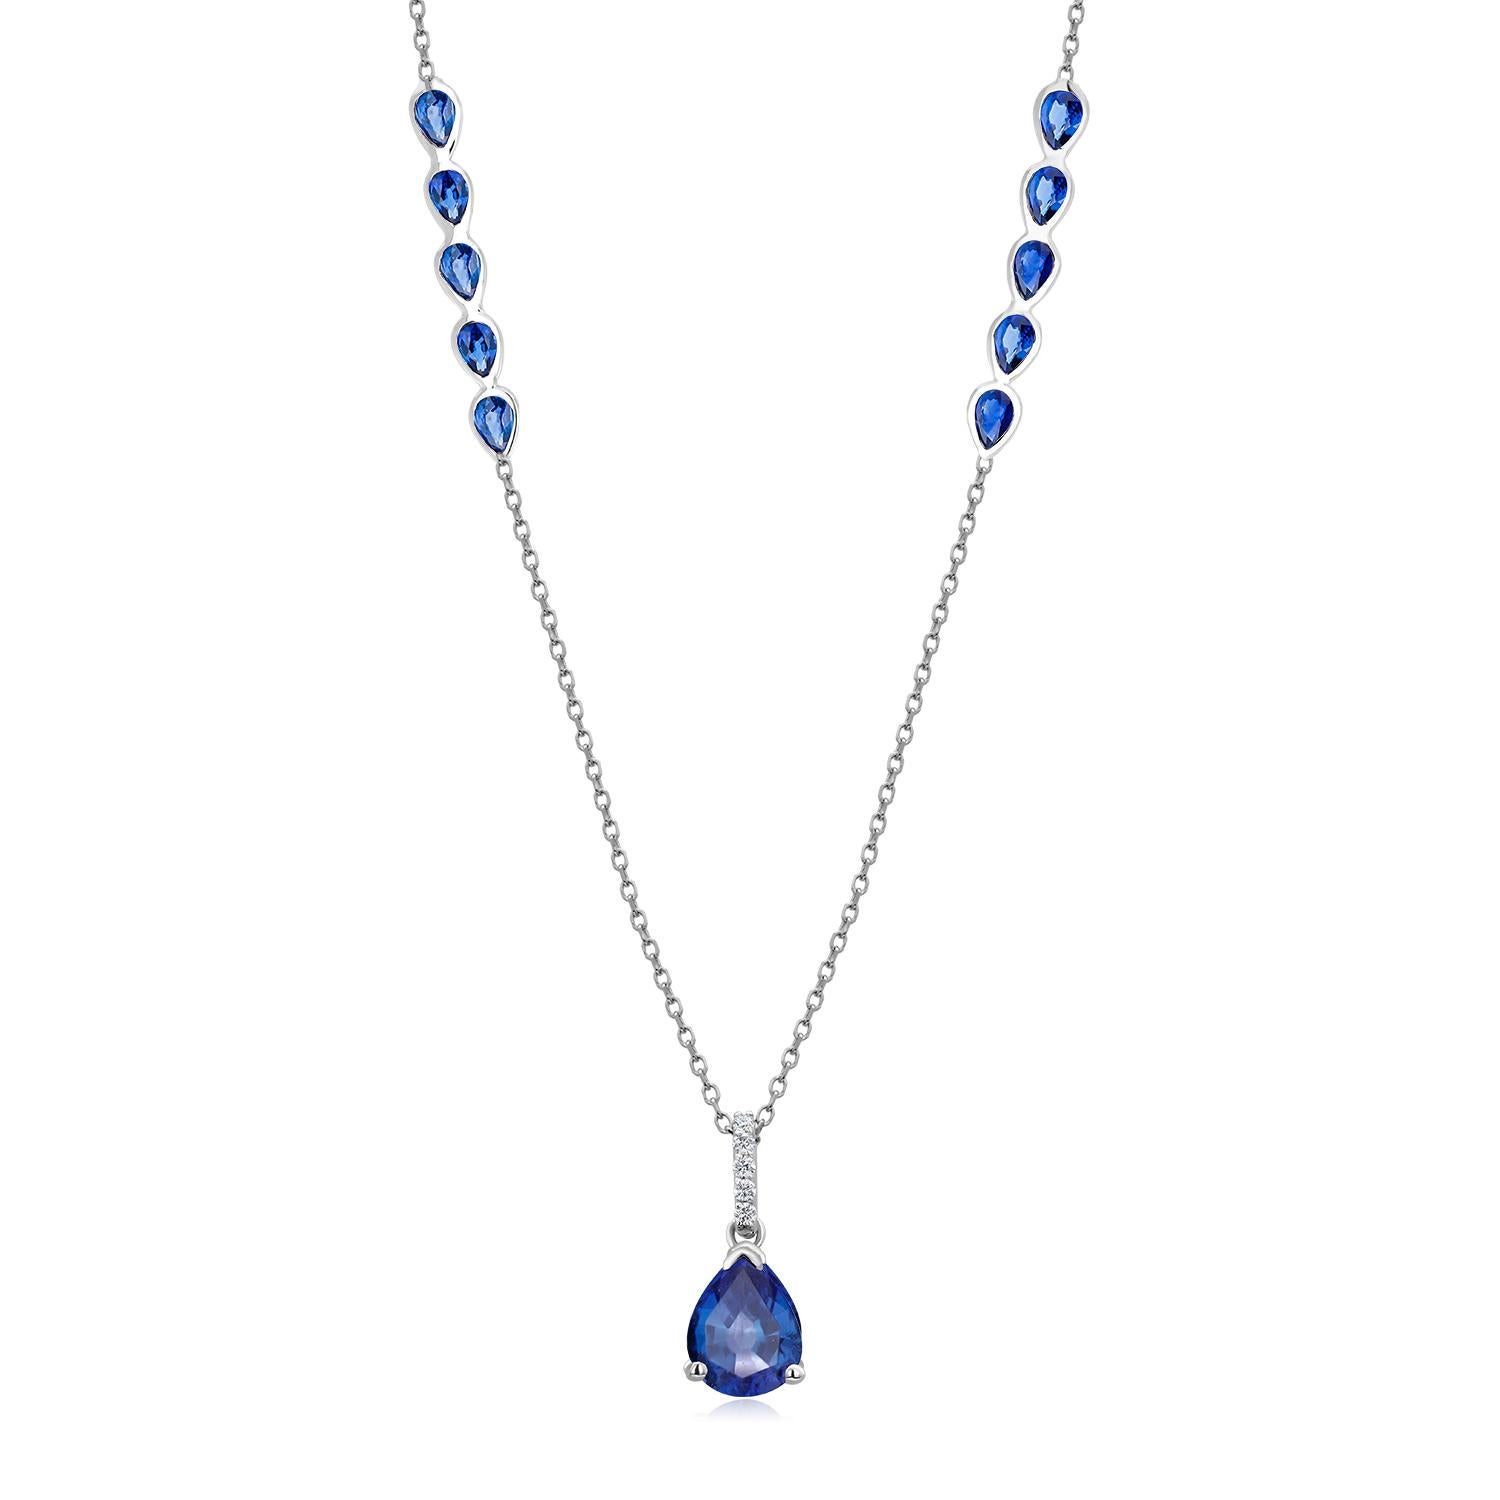 Eleven Pear Sapphires Diamonds 4.83 Carat White Gold 19.5 Inch Long Necklace For Sale 1